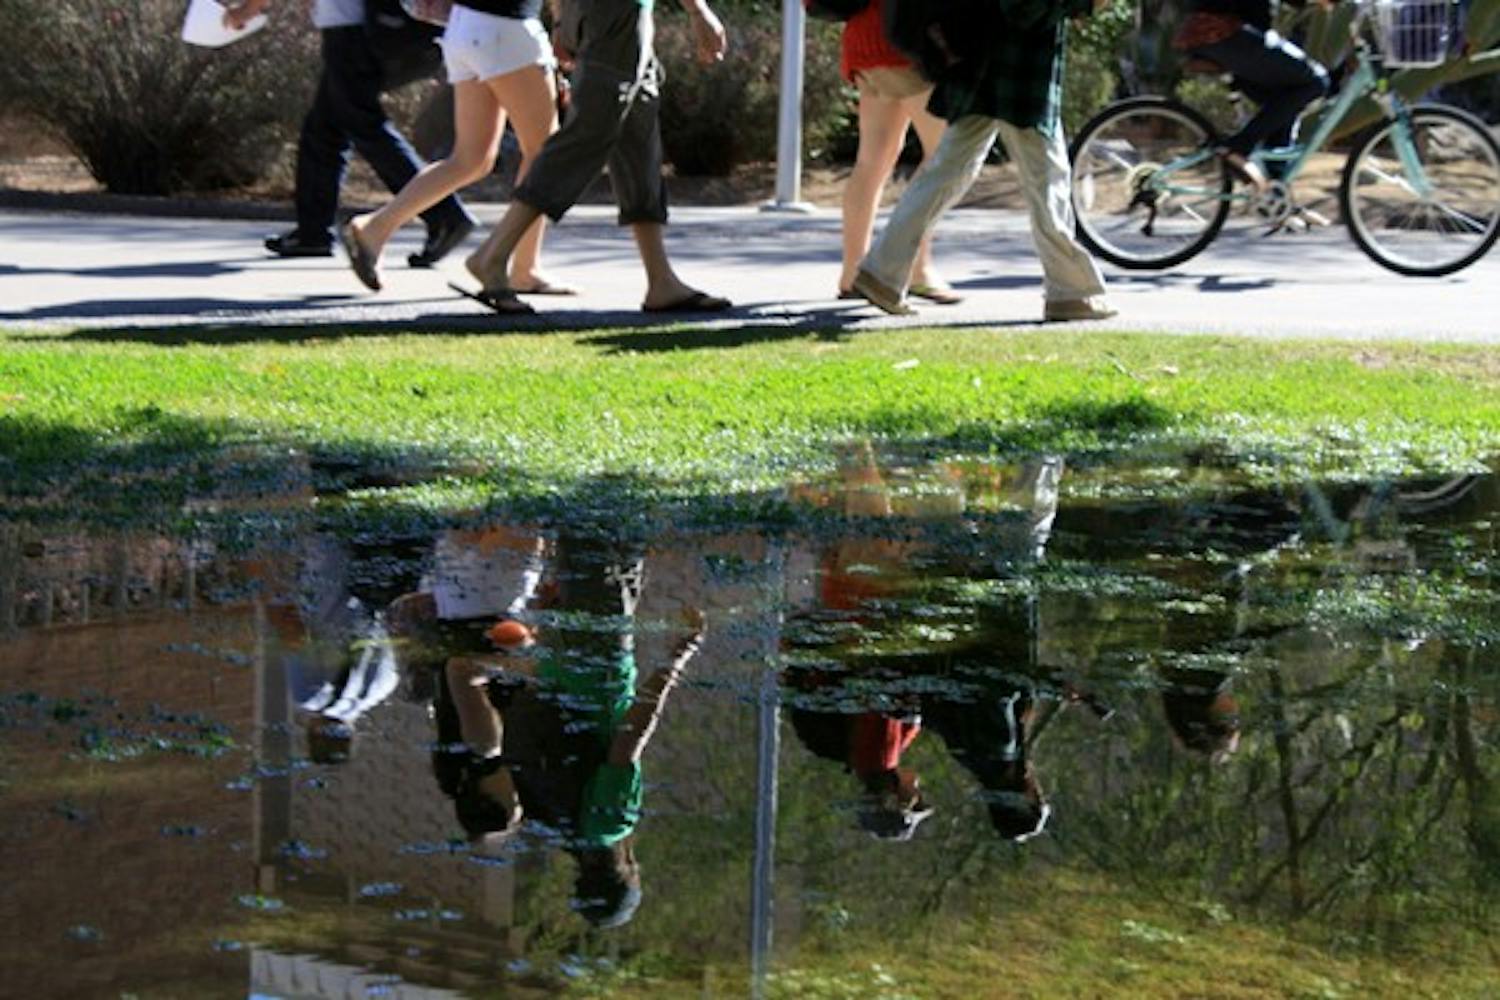 A puddle in the grass along Hayden Mall creates reflections of students walking and riding to class on the Tempe campus Monday afternoon. (Photo by Jessie Wardarski)